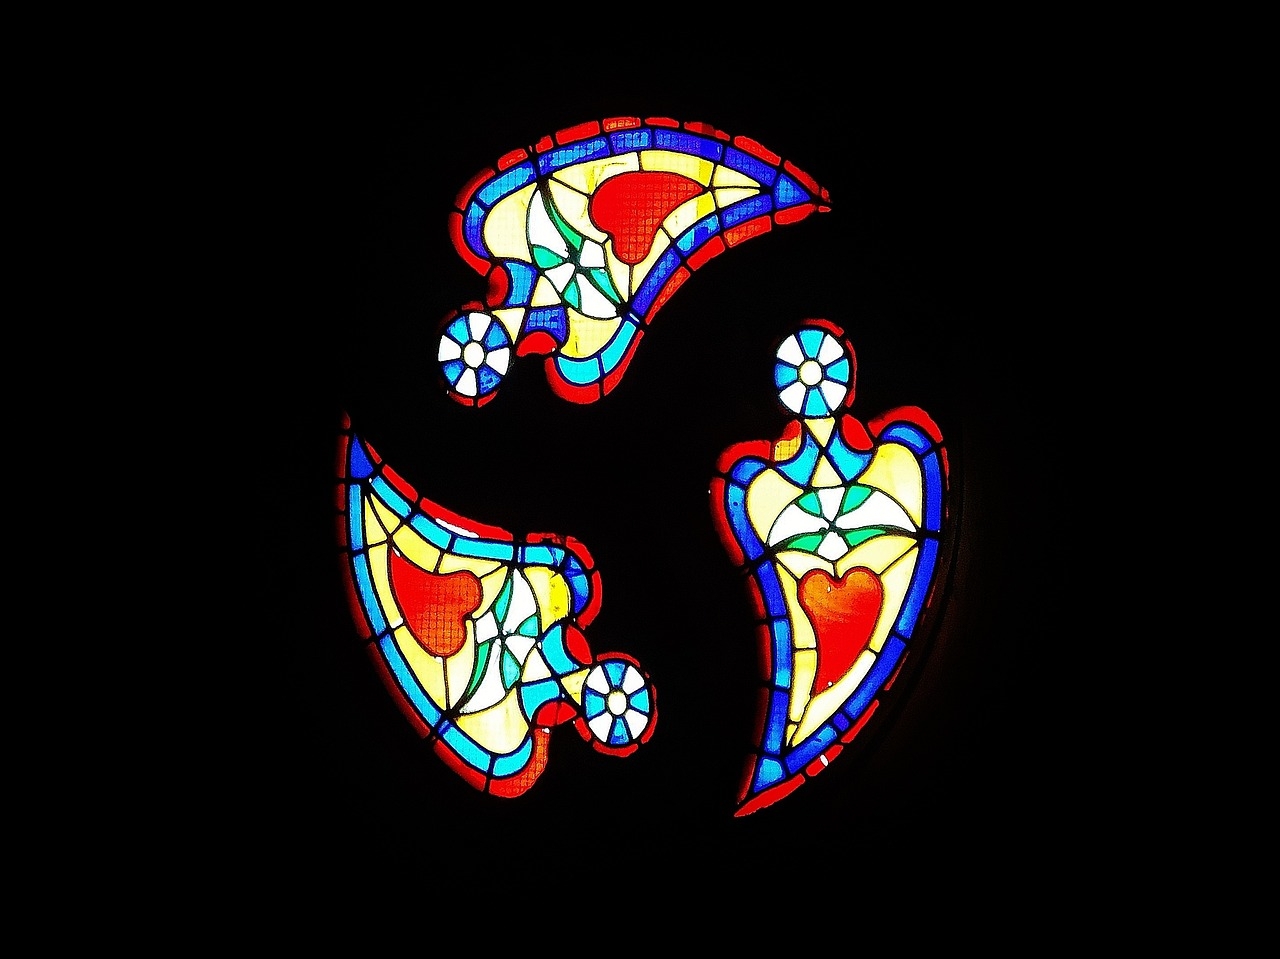 GlassArtStories - Illuminating Spaces with Stained Glass Masterpieces